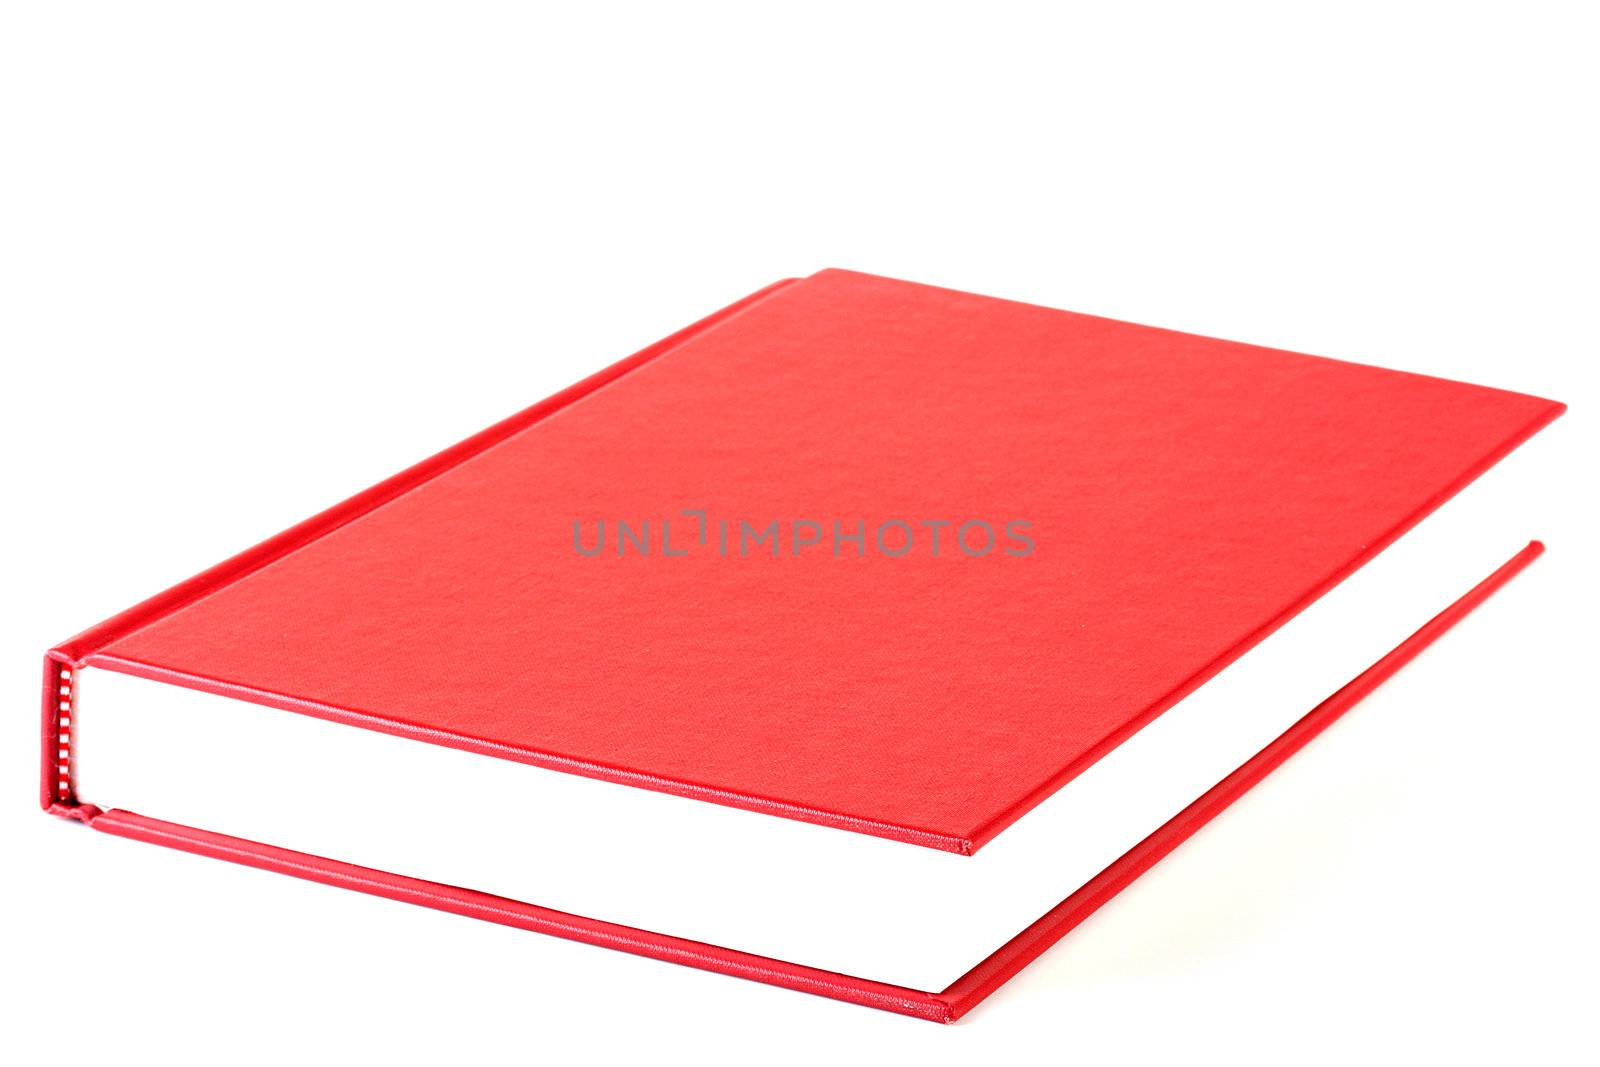 The red thick book for reading on a white background.